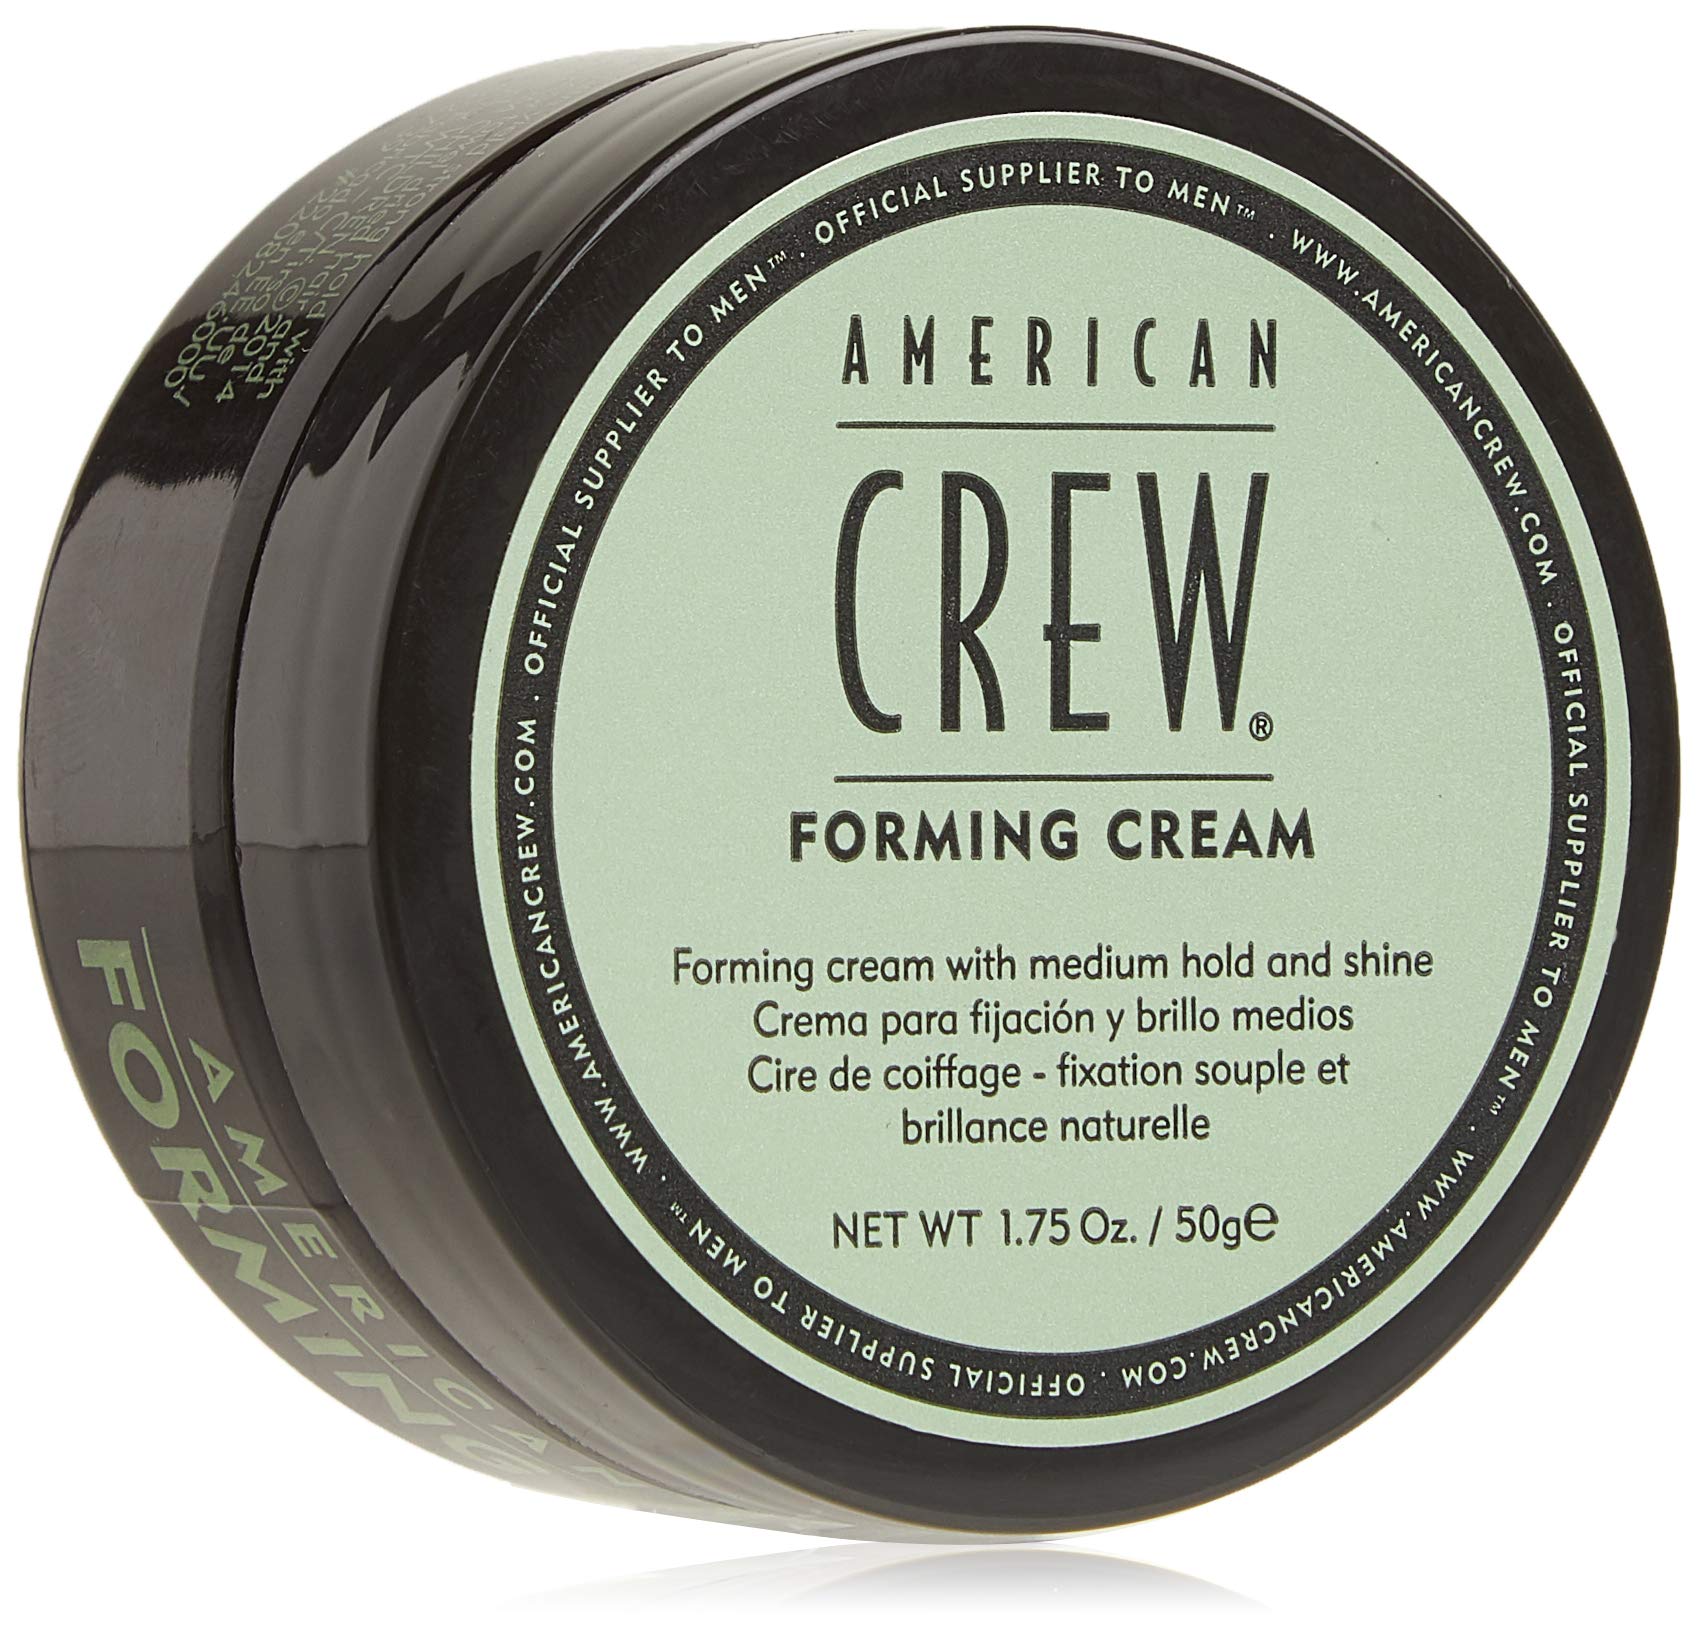 American Crew Forming Cream For mens 85g / 50g